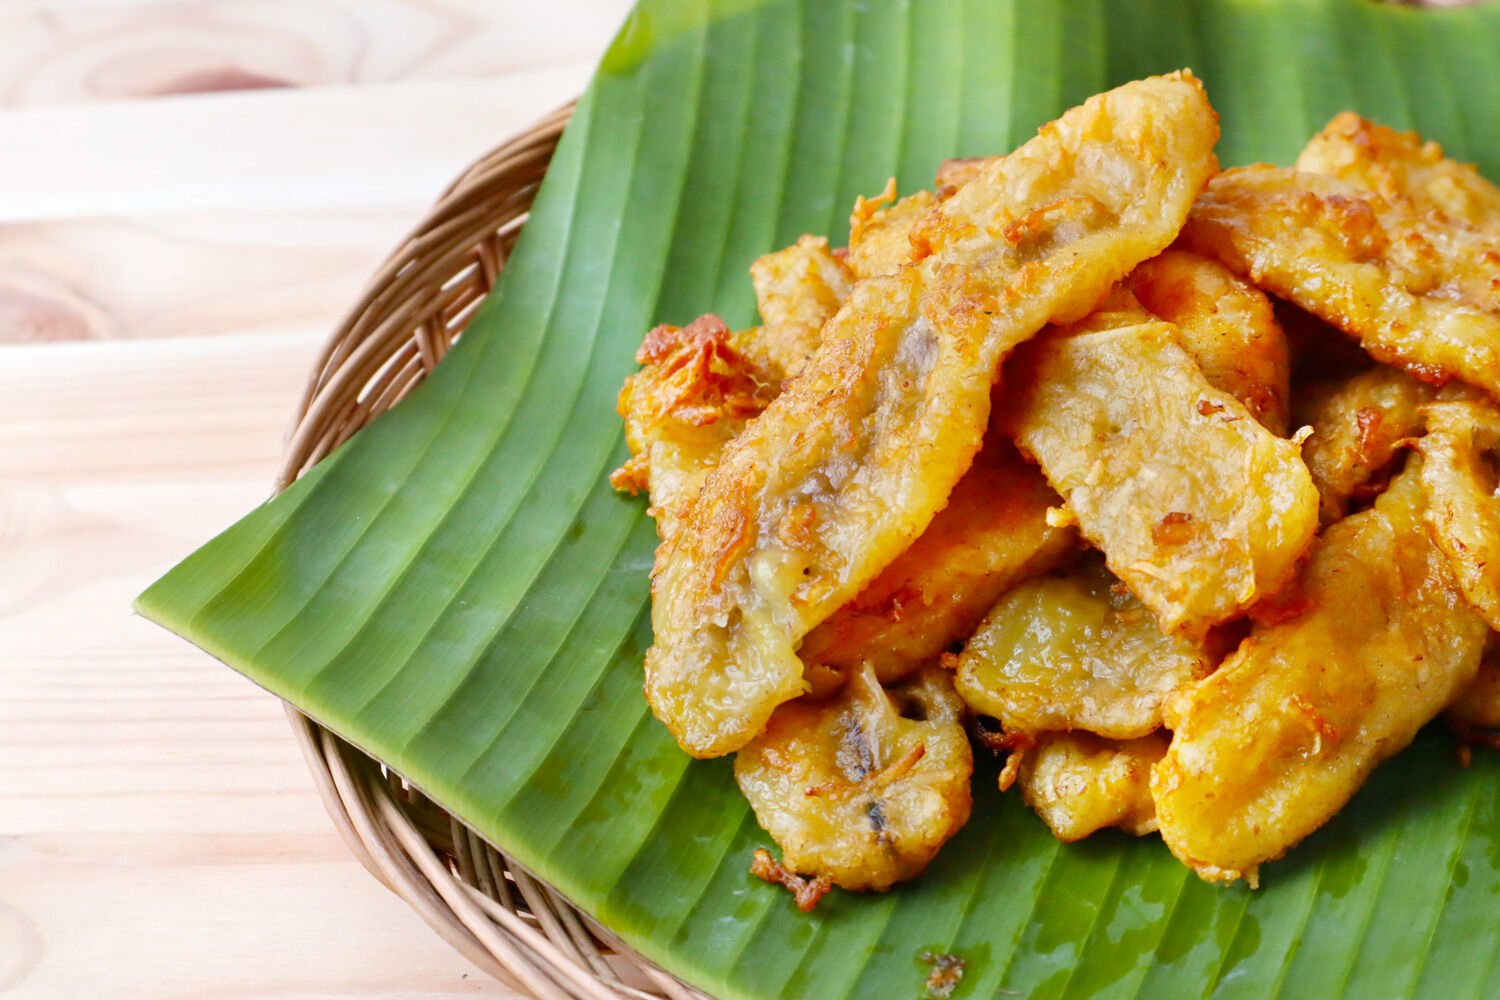 Nutritious snack Thai fried banana fritters